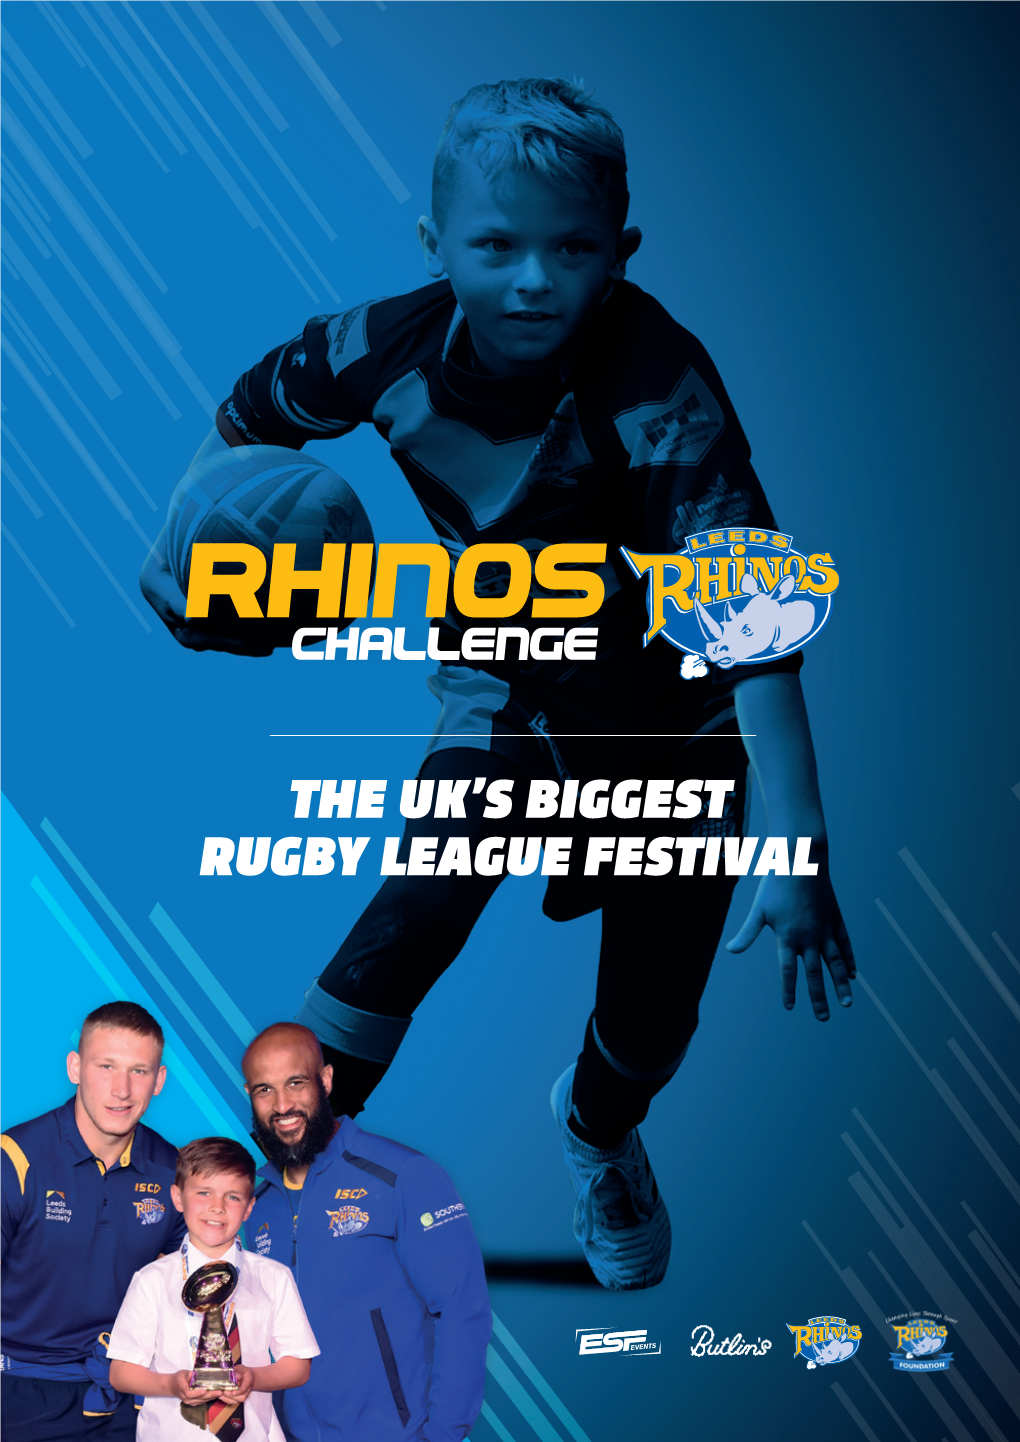 The Uk's Biggest Rugby League Festival